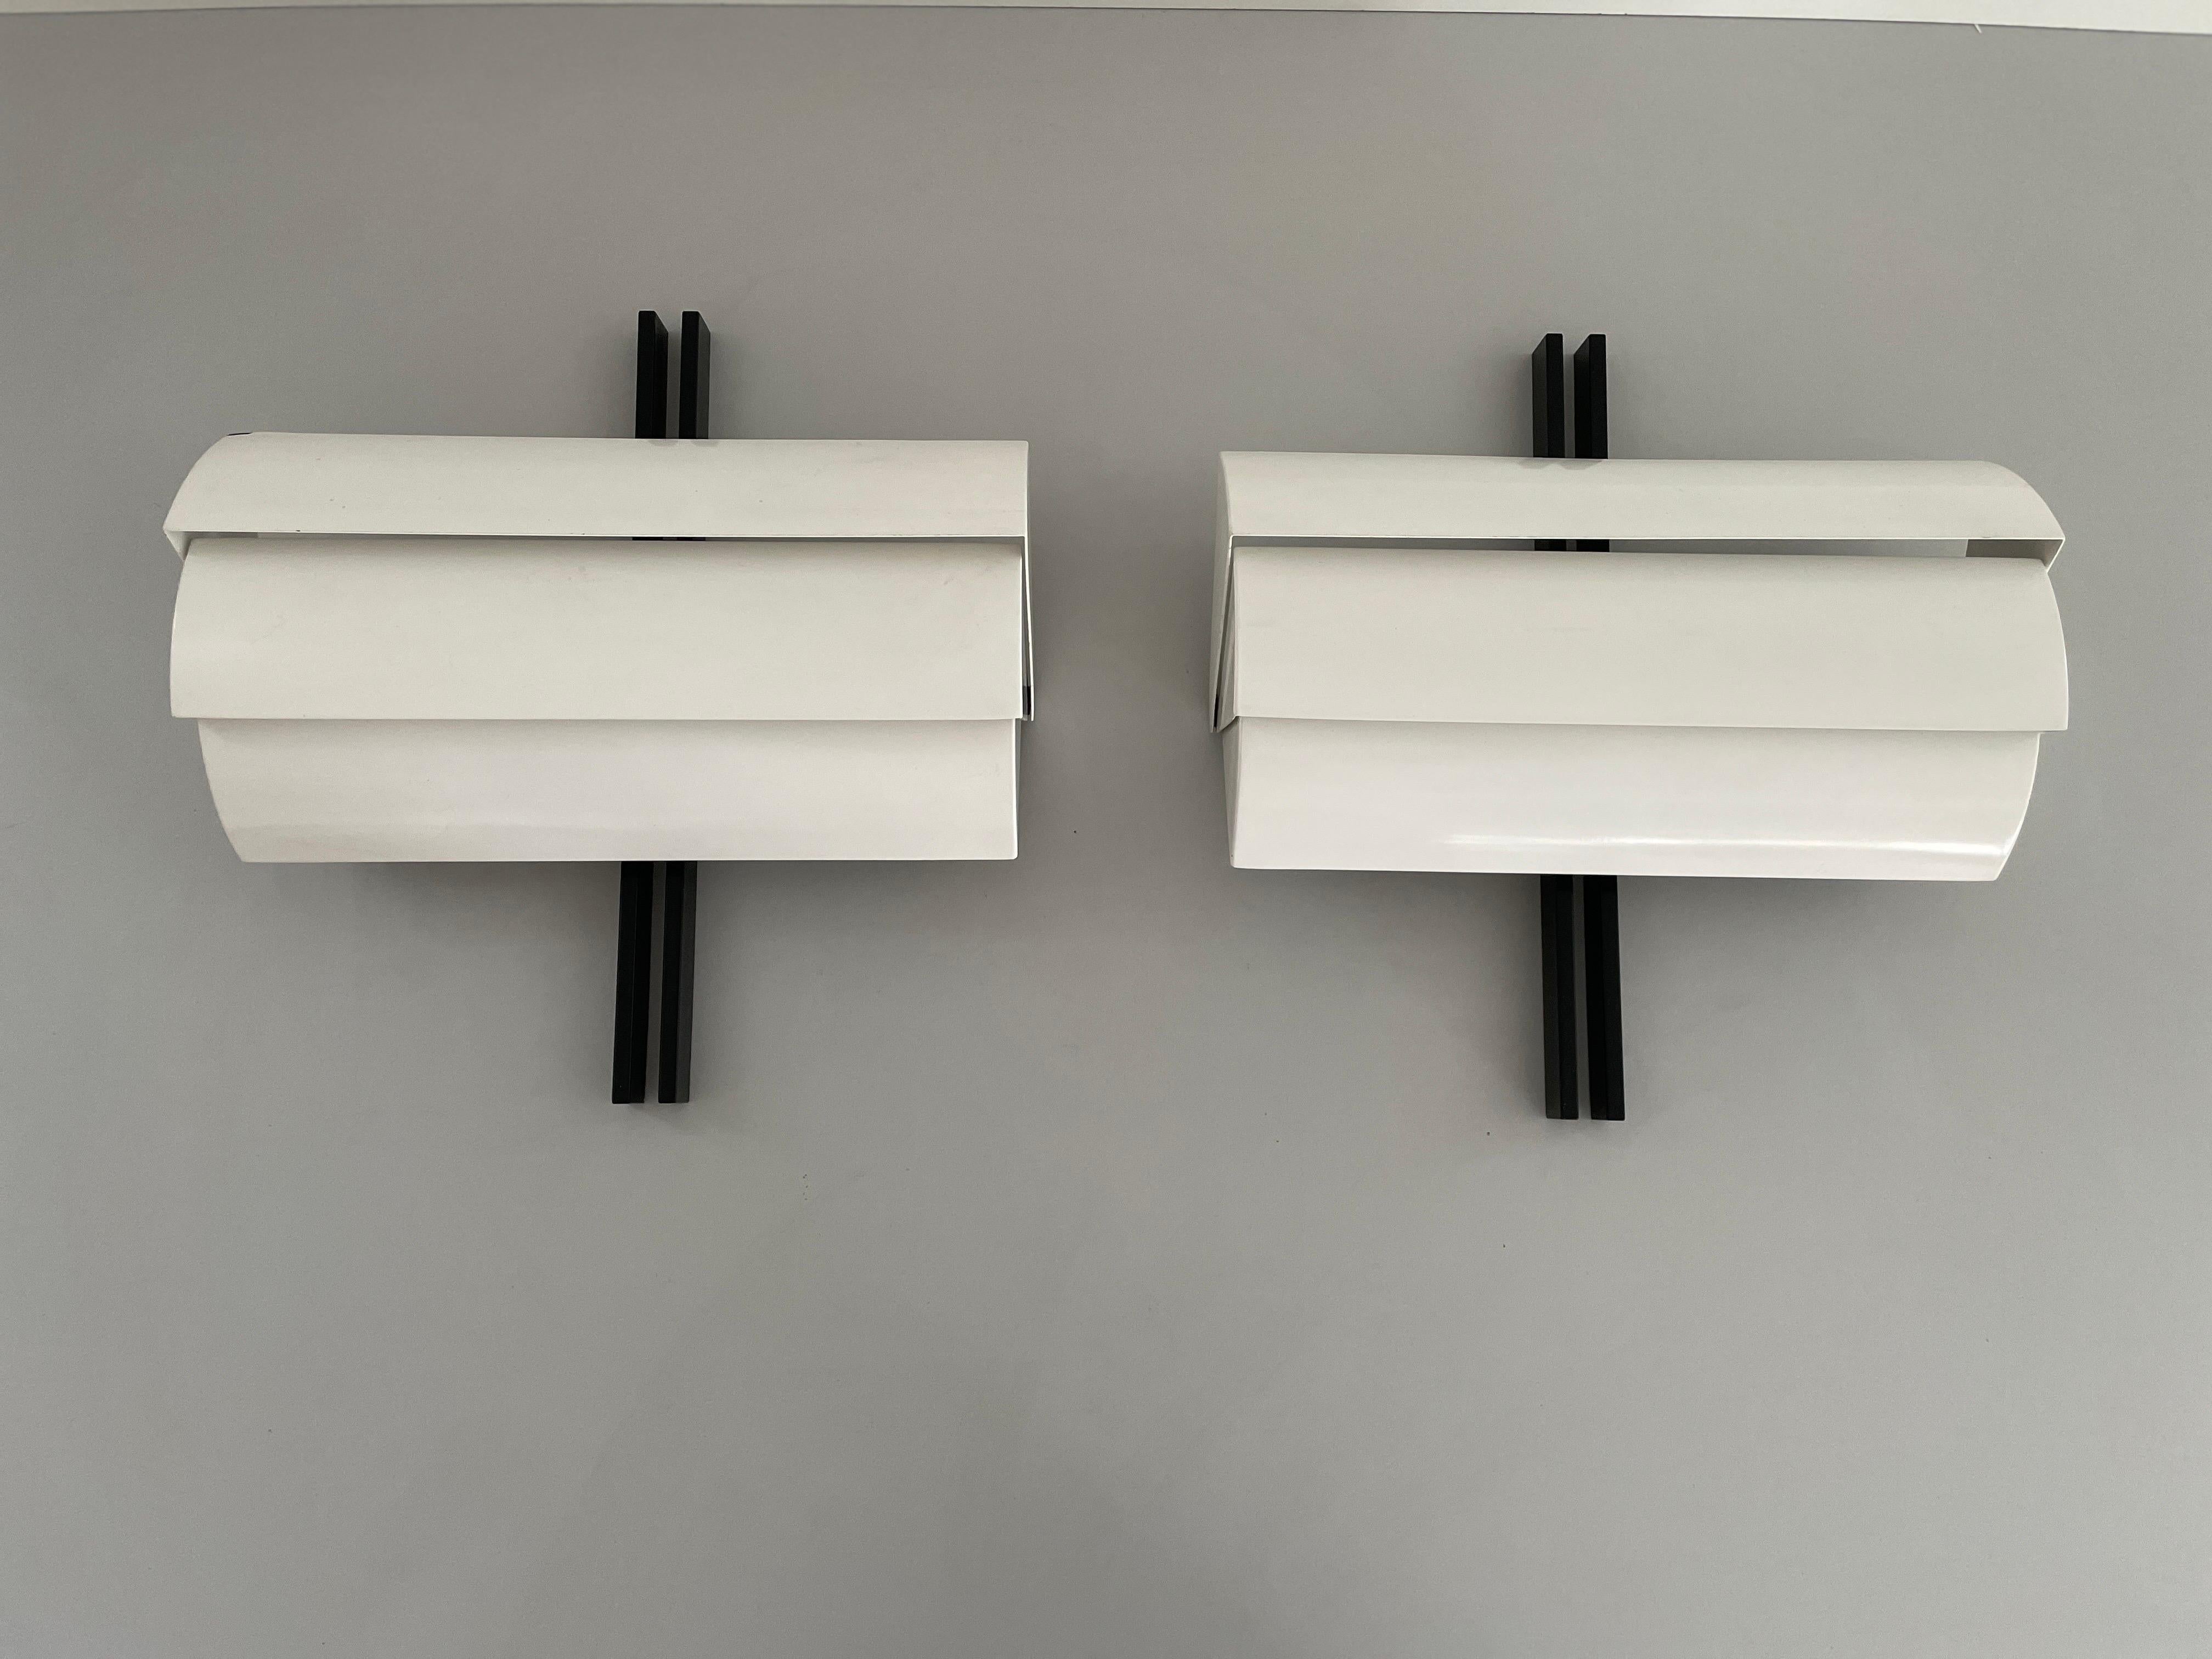 Black and White Metal Pair of Sconces by E. Gismondi for Artemide, 1970s, Italy

Very elegant and Minimalist wall lamps.

Lamps are in very good condition.

These lamps works with E27 standard light bulbs. 
Wired and suitable to use in all